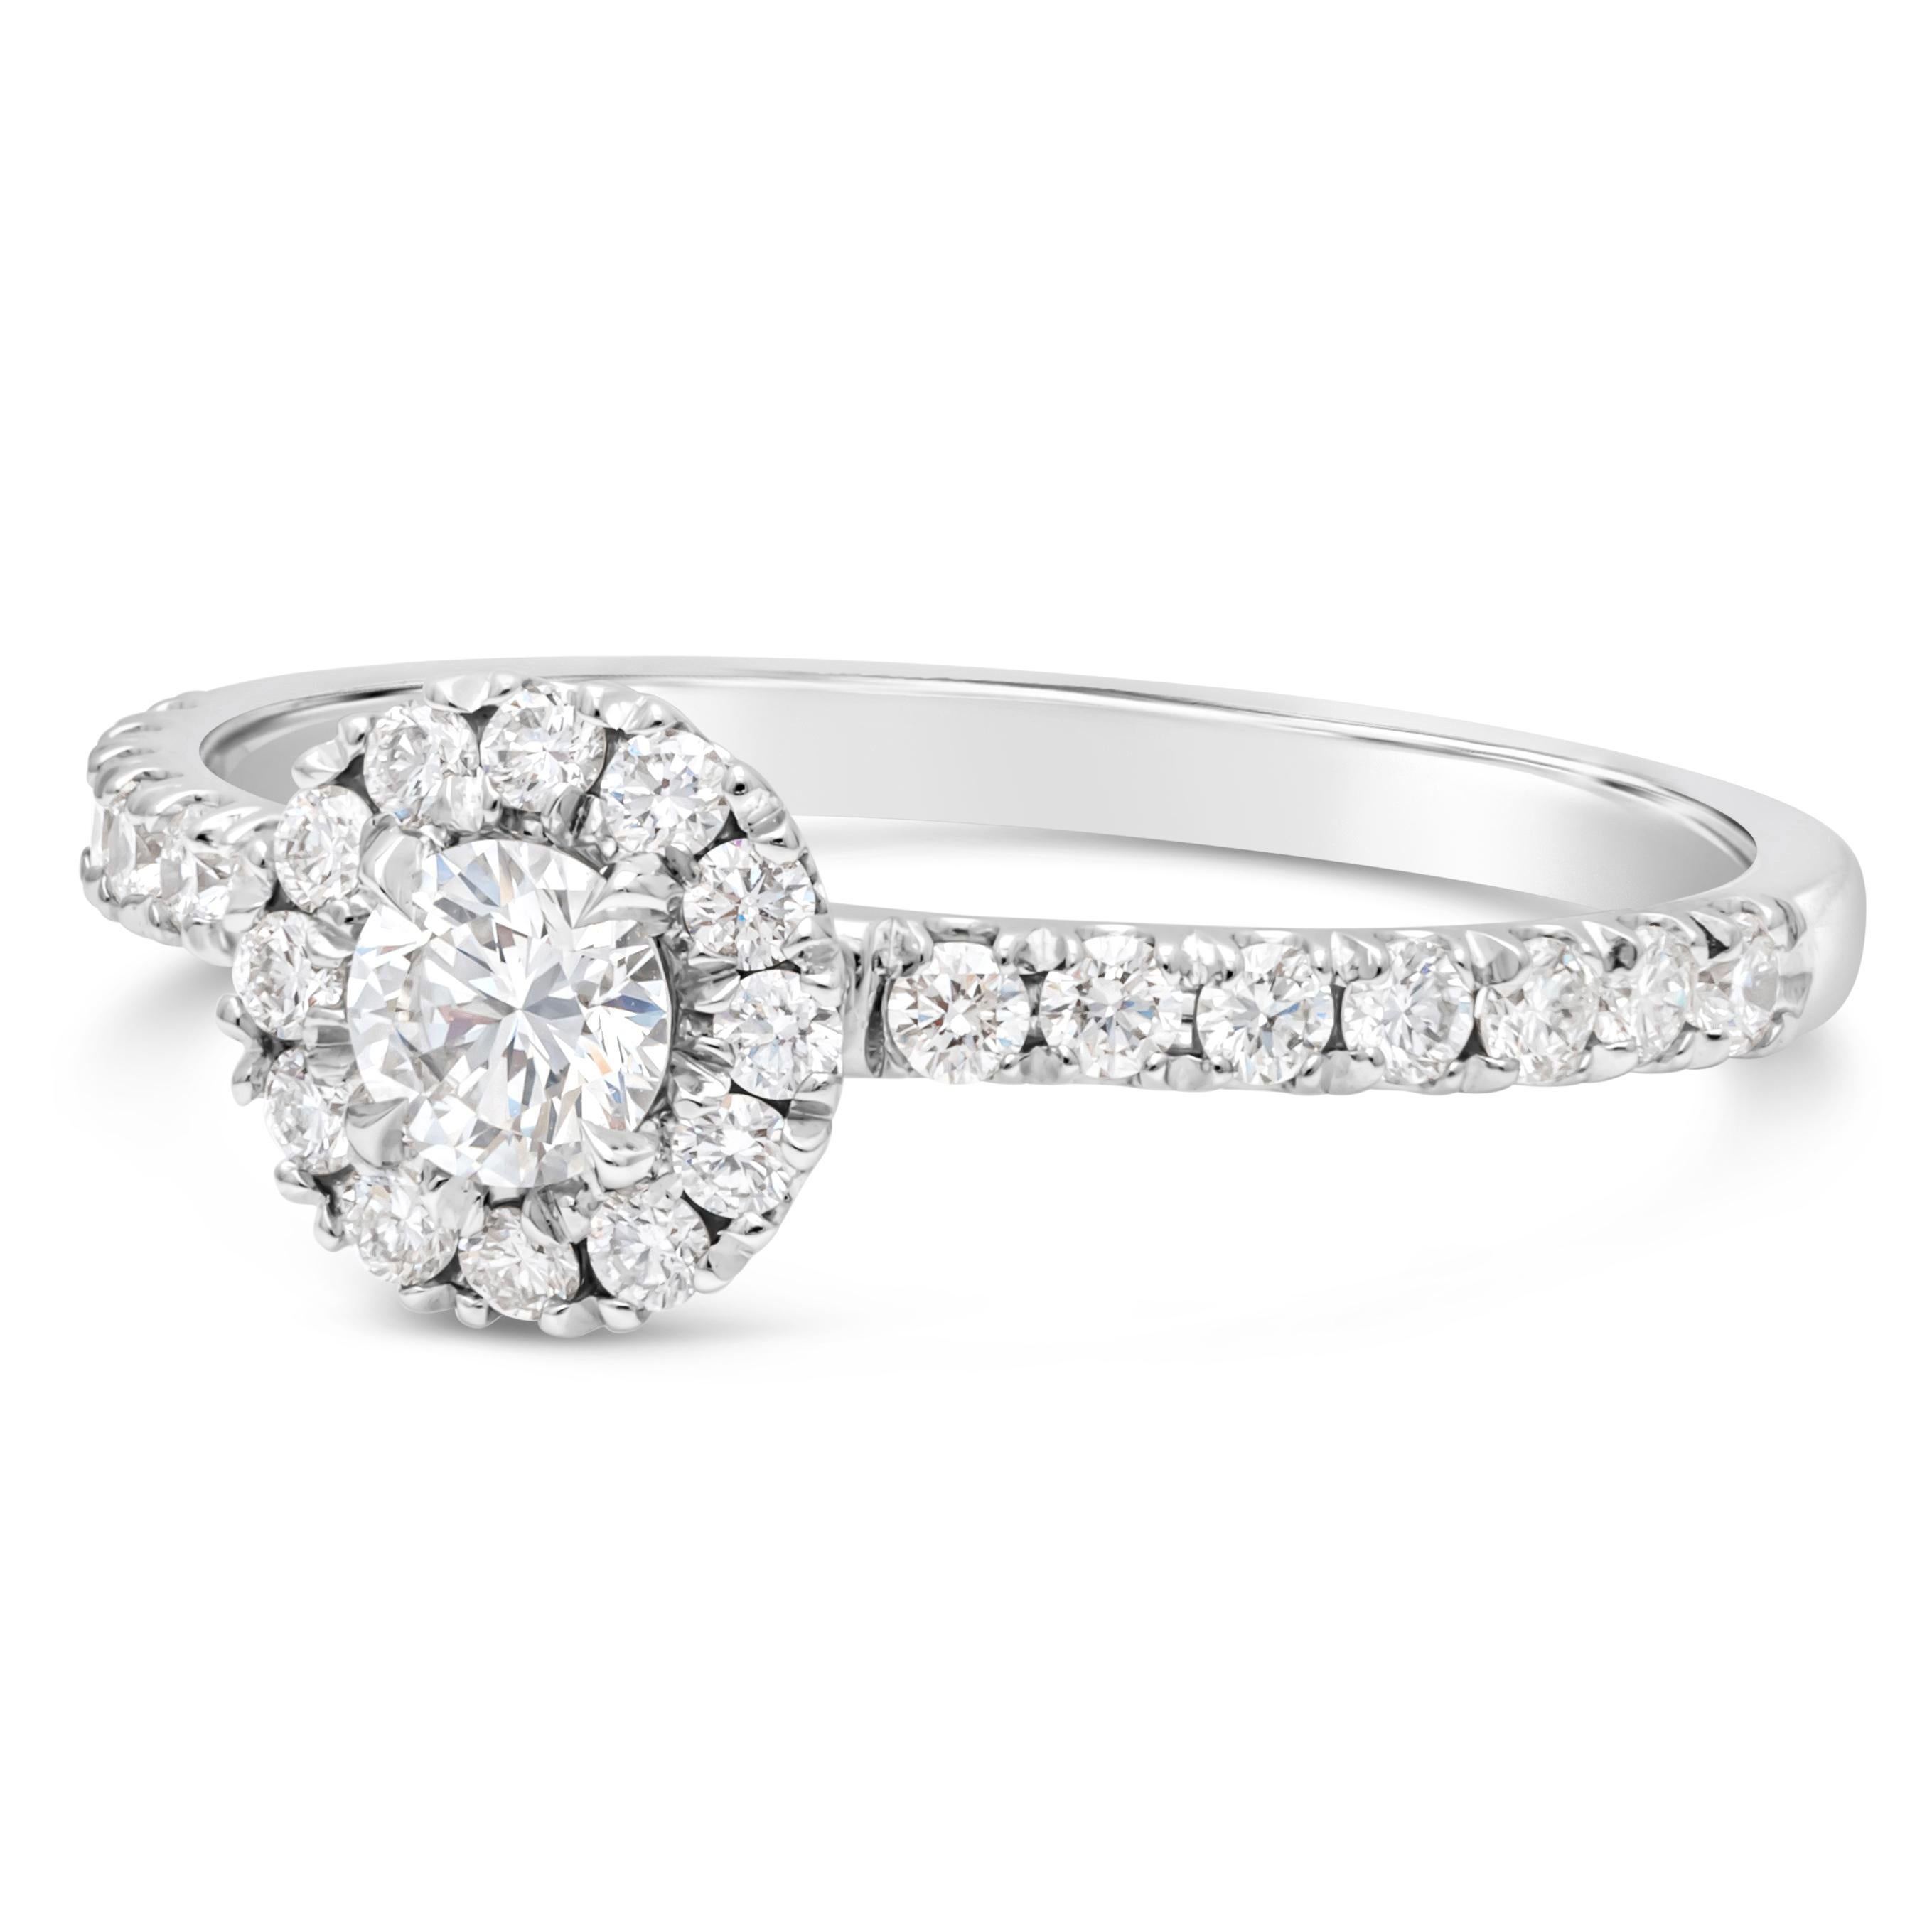 A classic engagement ring showcasing a GIA certified 0.21 carat brilliant round diamond F color, VS1 in clarity. Surrounded by round brilliant diamonds in a halo setting. Shank made in platinum is encrusted with diamonds set in a half eternity